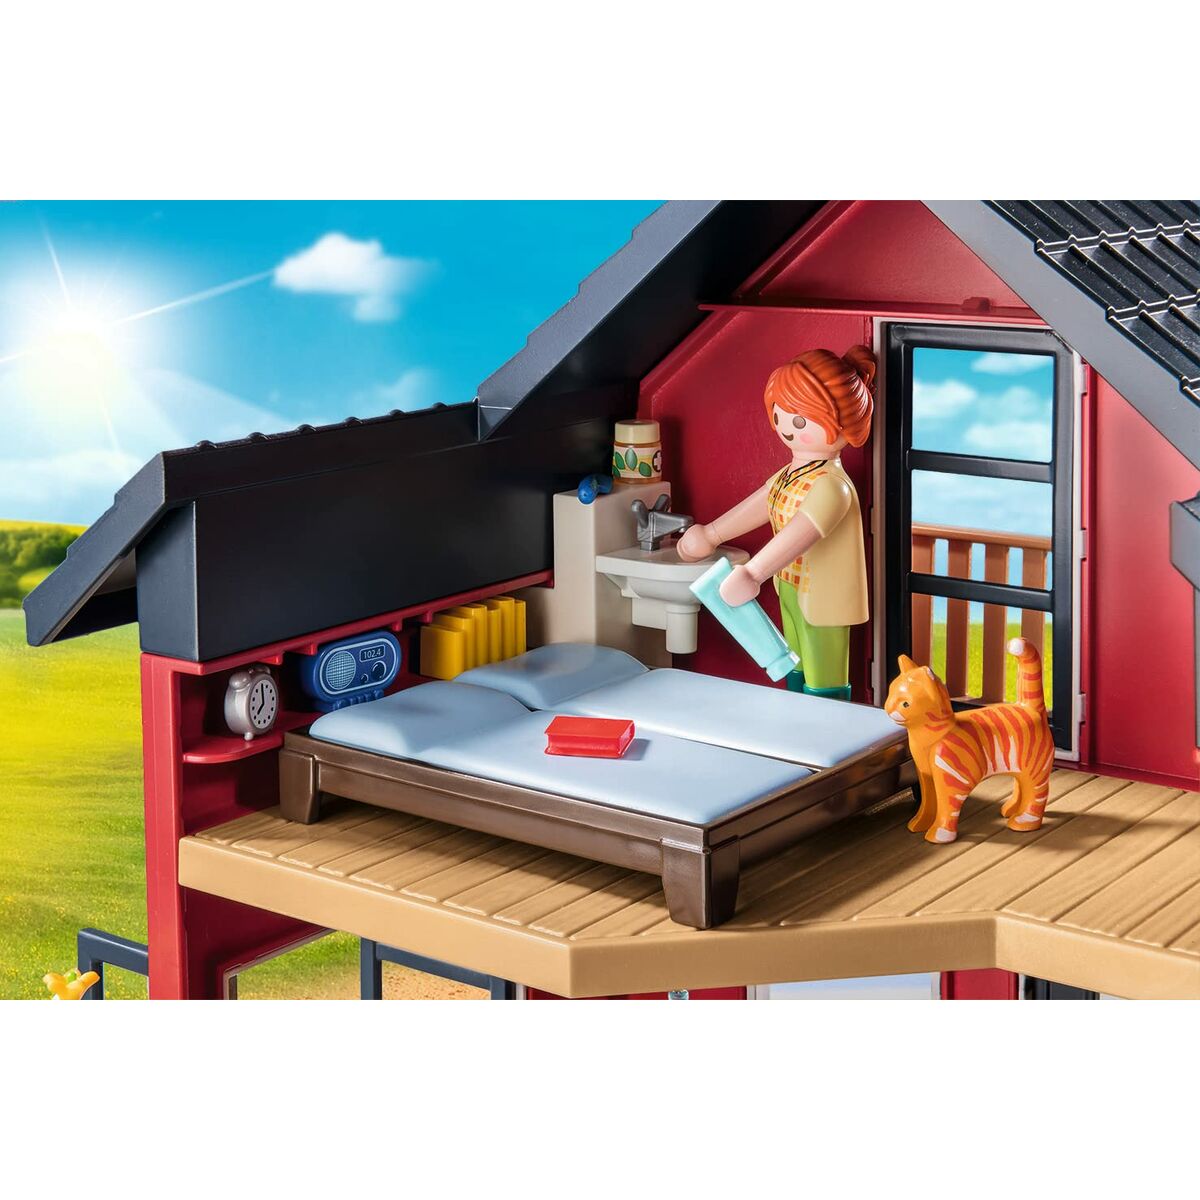 Playmobil 71248 Country Furnished House with Barrow and Cow 137 Daudzums